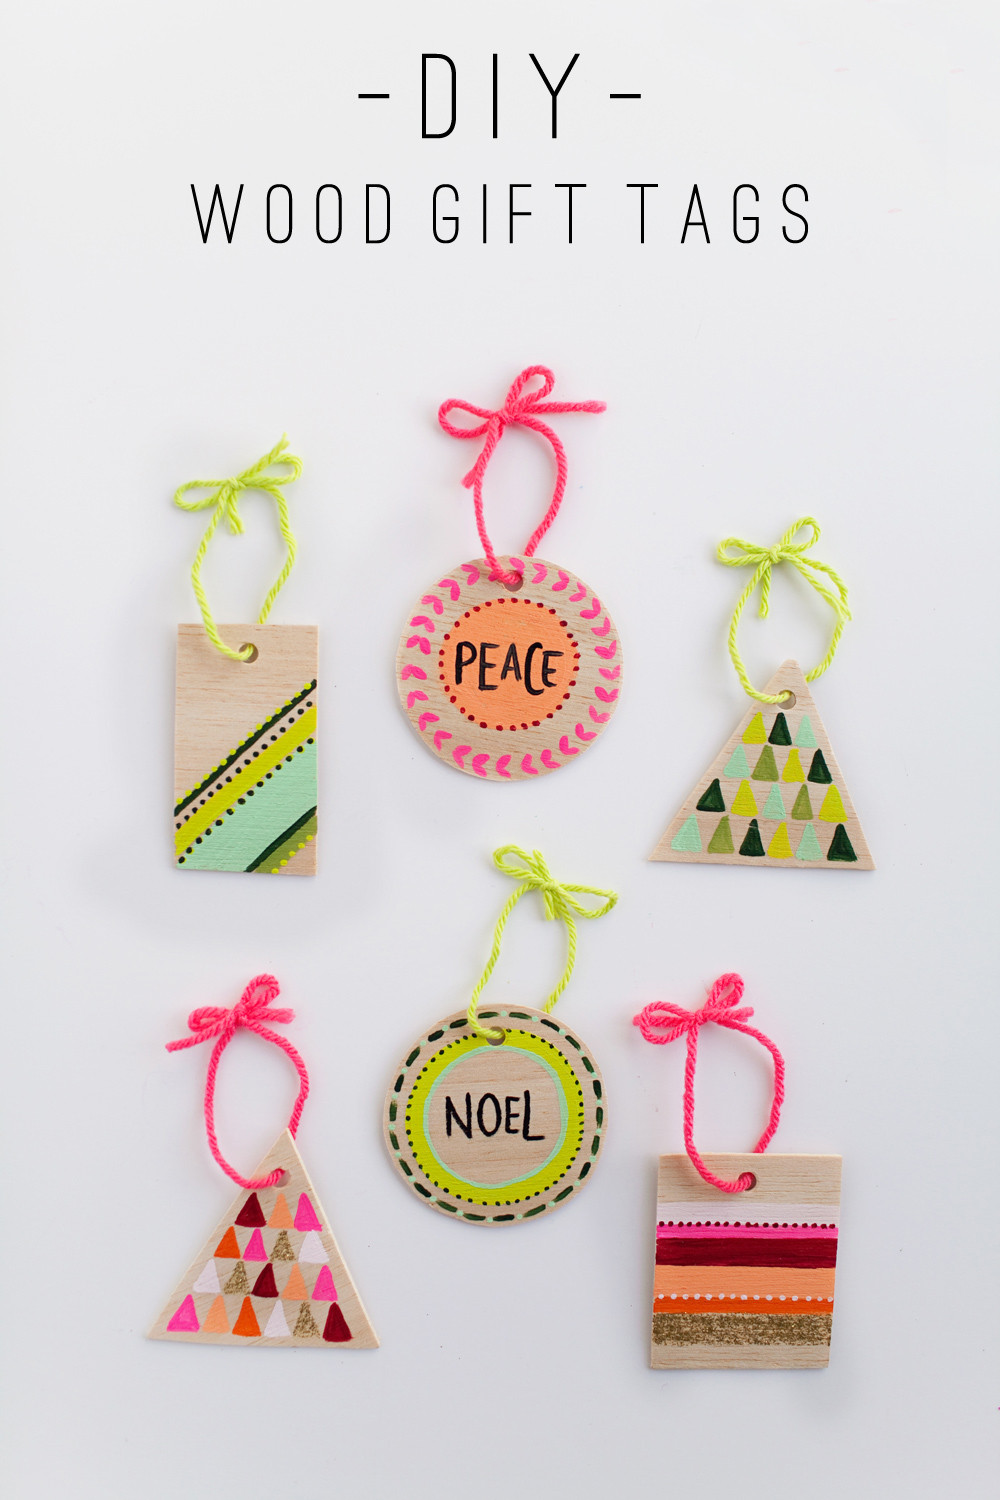 Best ideas about DIY Gift Tags
. Save or Pin TELL DIY WOOD GIFT TAGS AND ORNAMENTS Tell Love and Party Now.